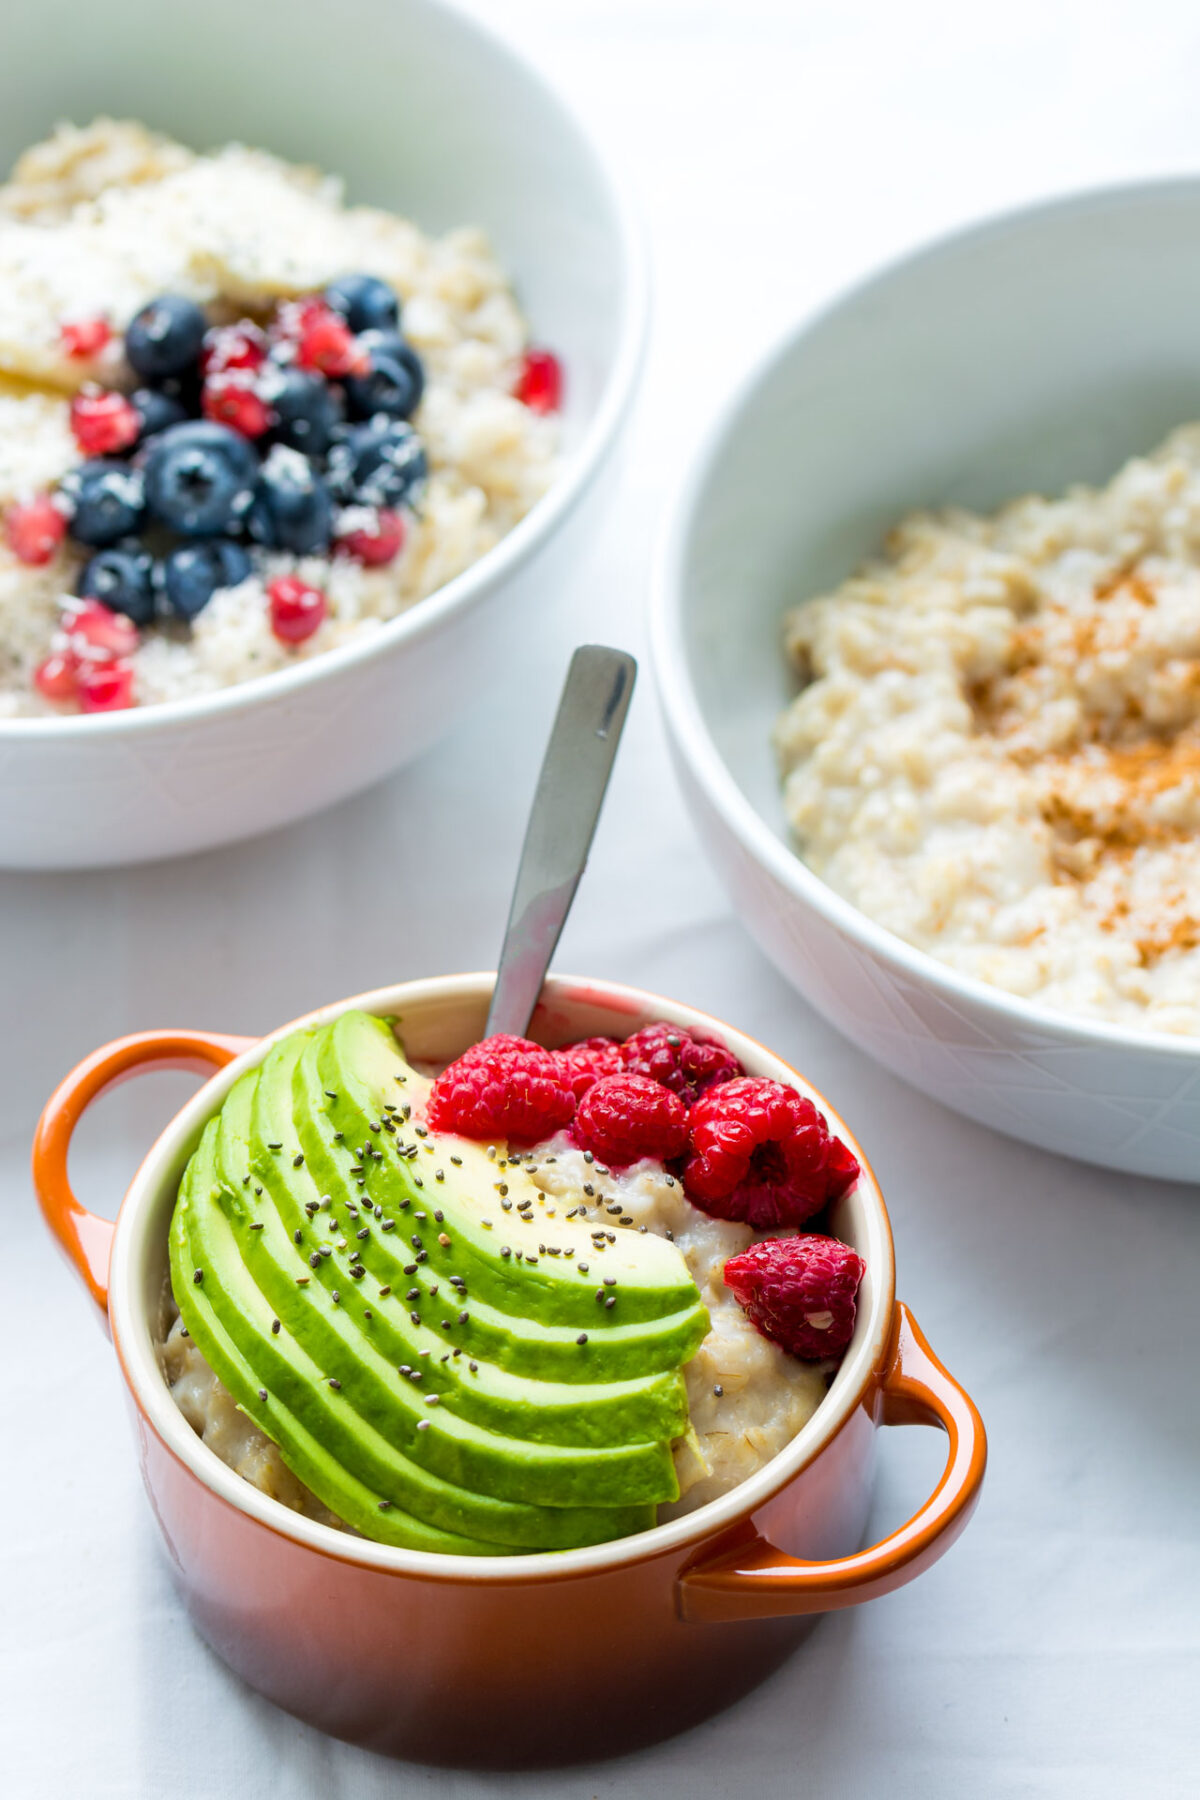 an image of a bowl containing an oatmeal topped with fresh slices of avocado and raspberries